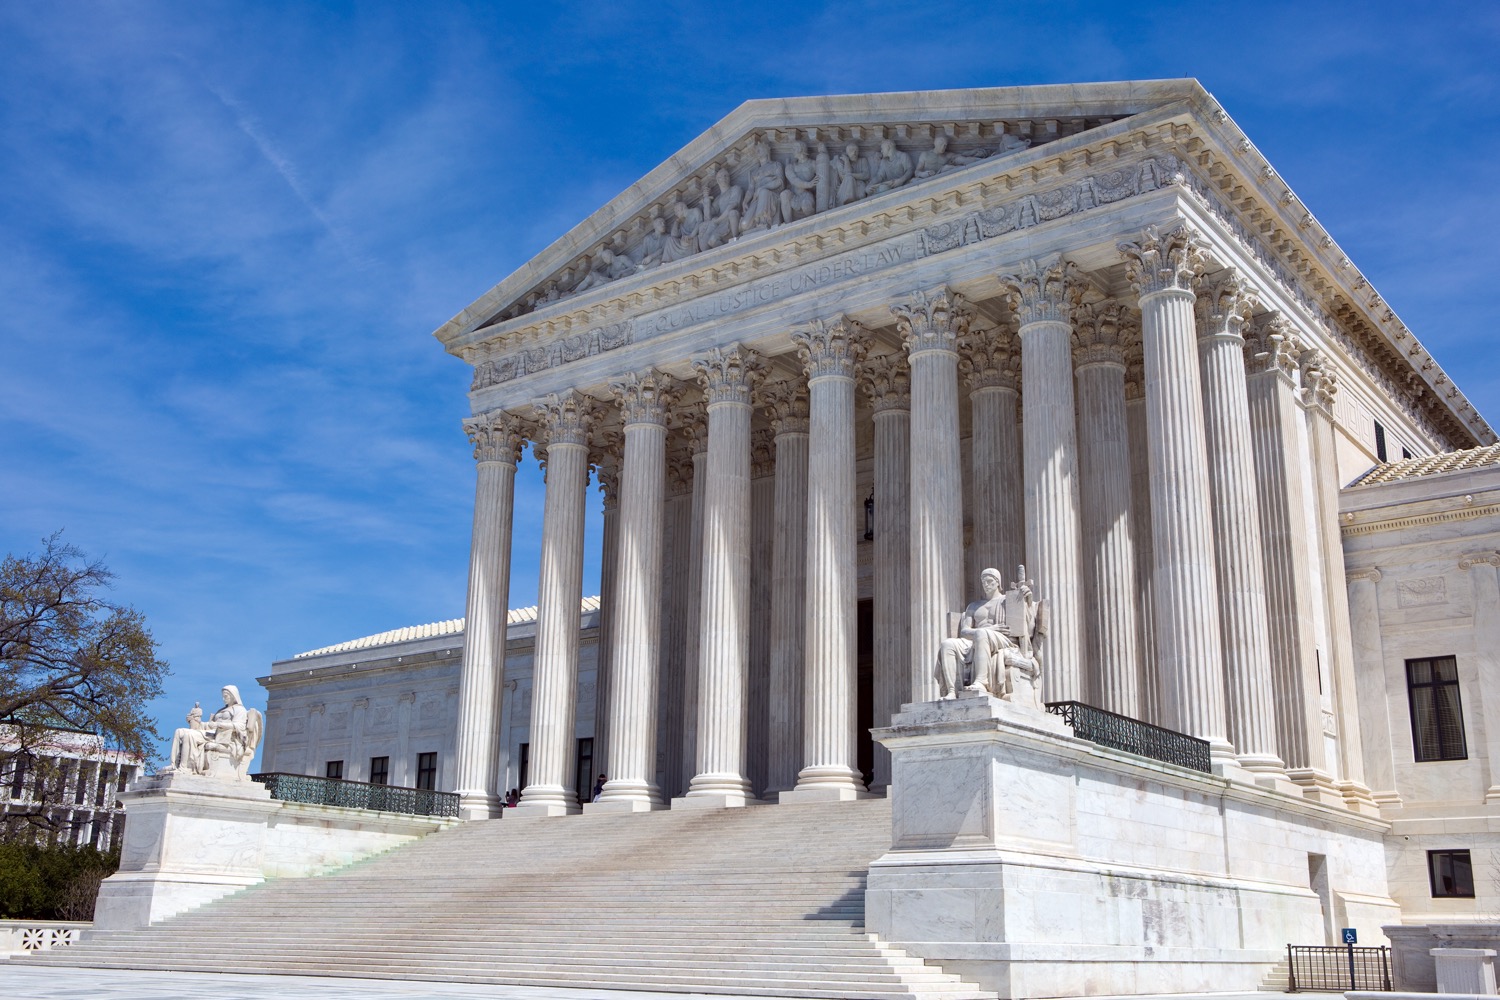 the supreme court from the side, set against a blue sky